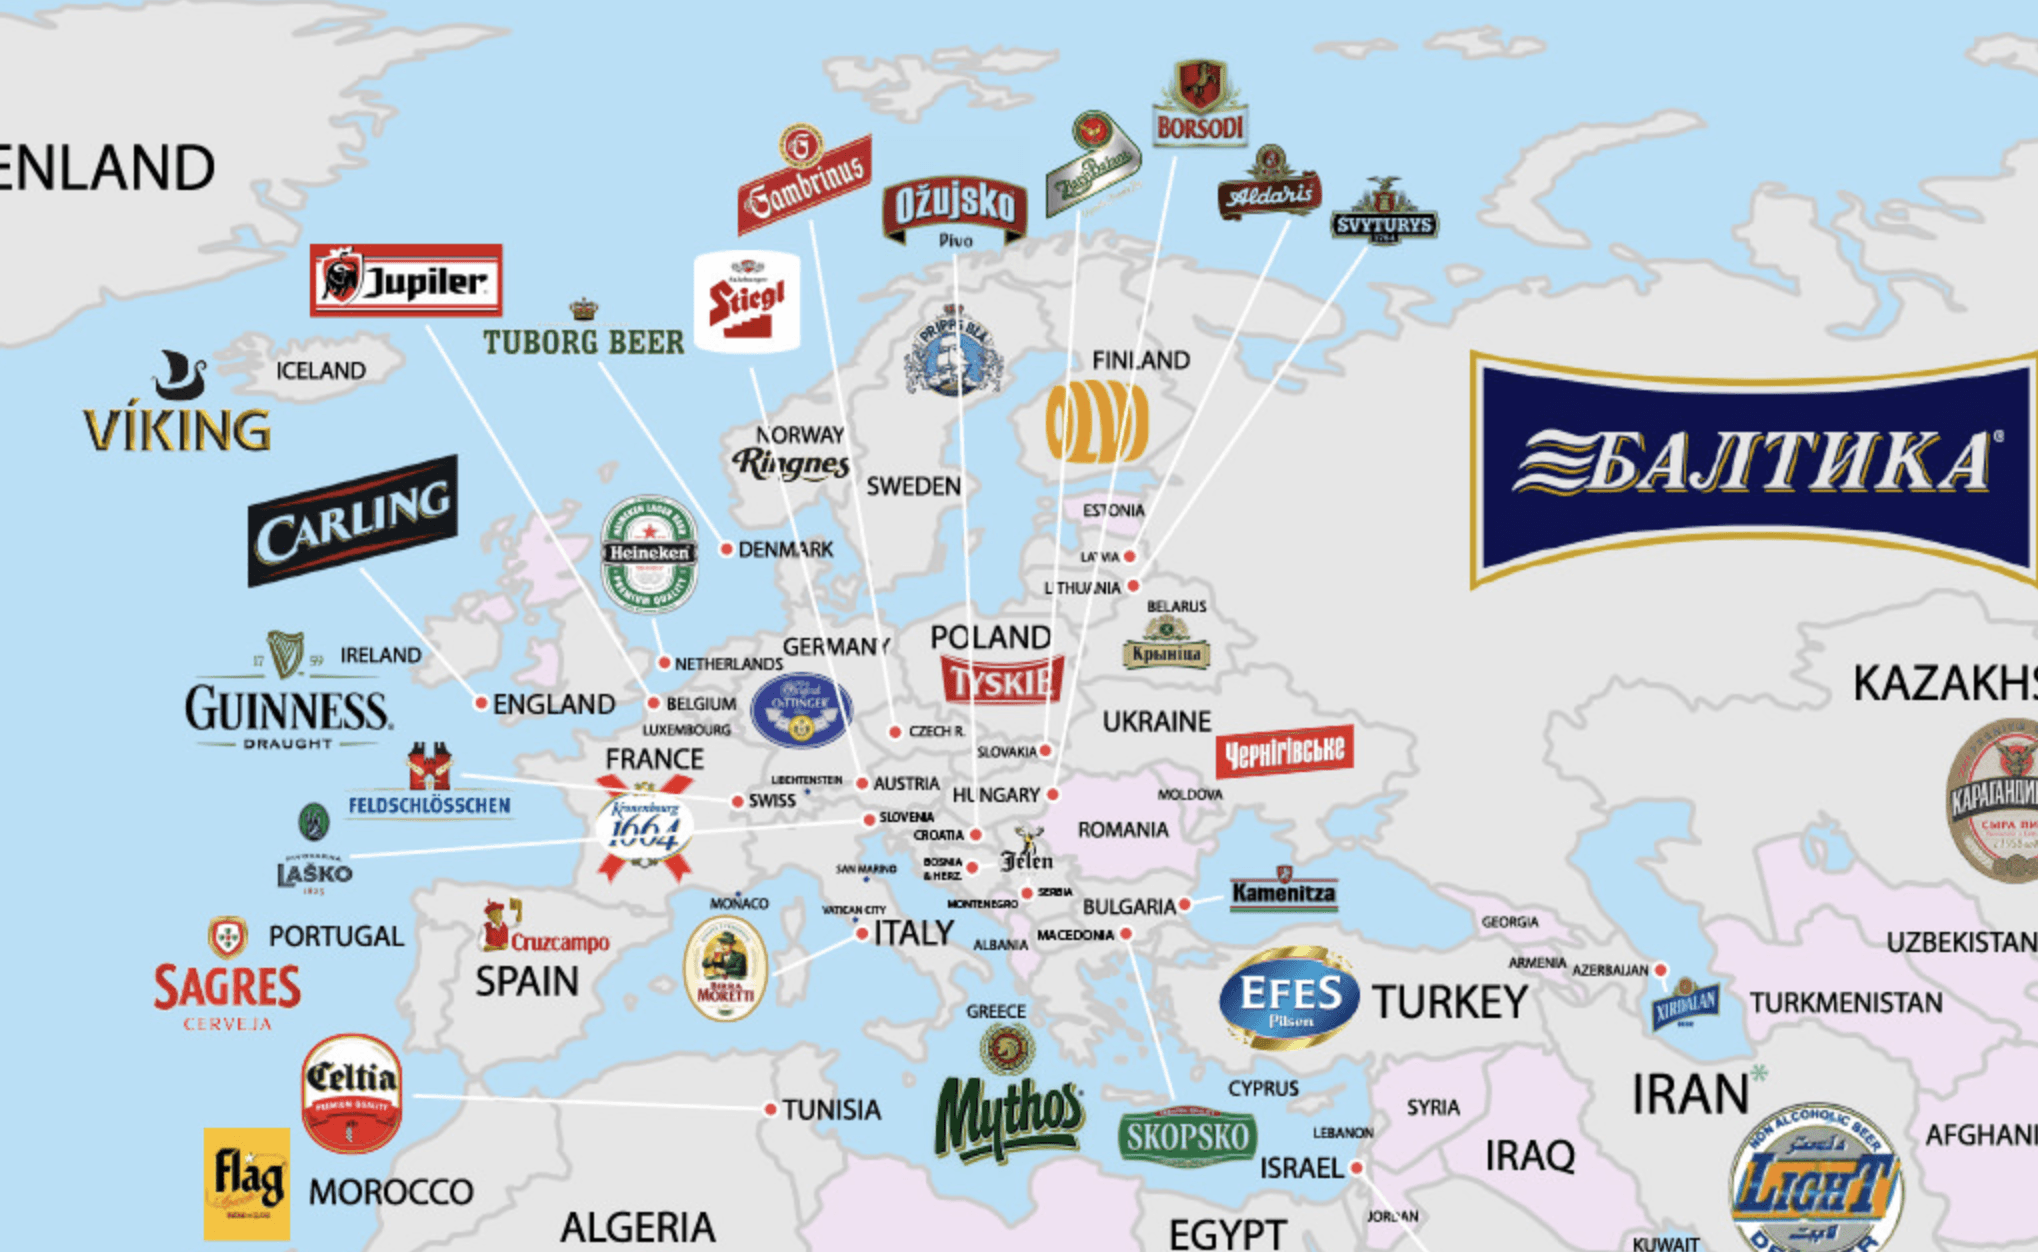 Most Popular European Logo - Most popular Beer, in every European country - according to ...